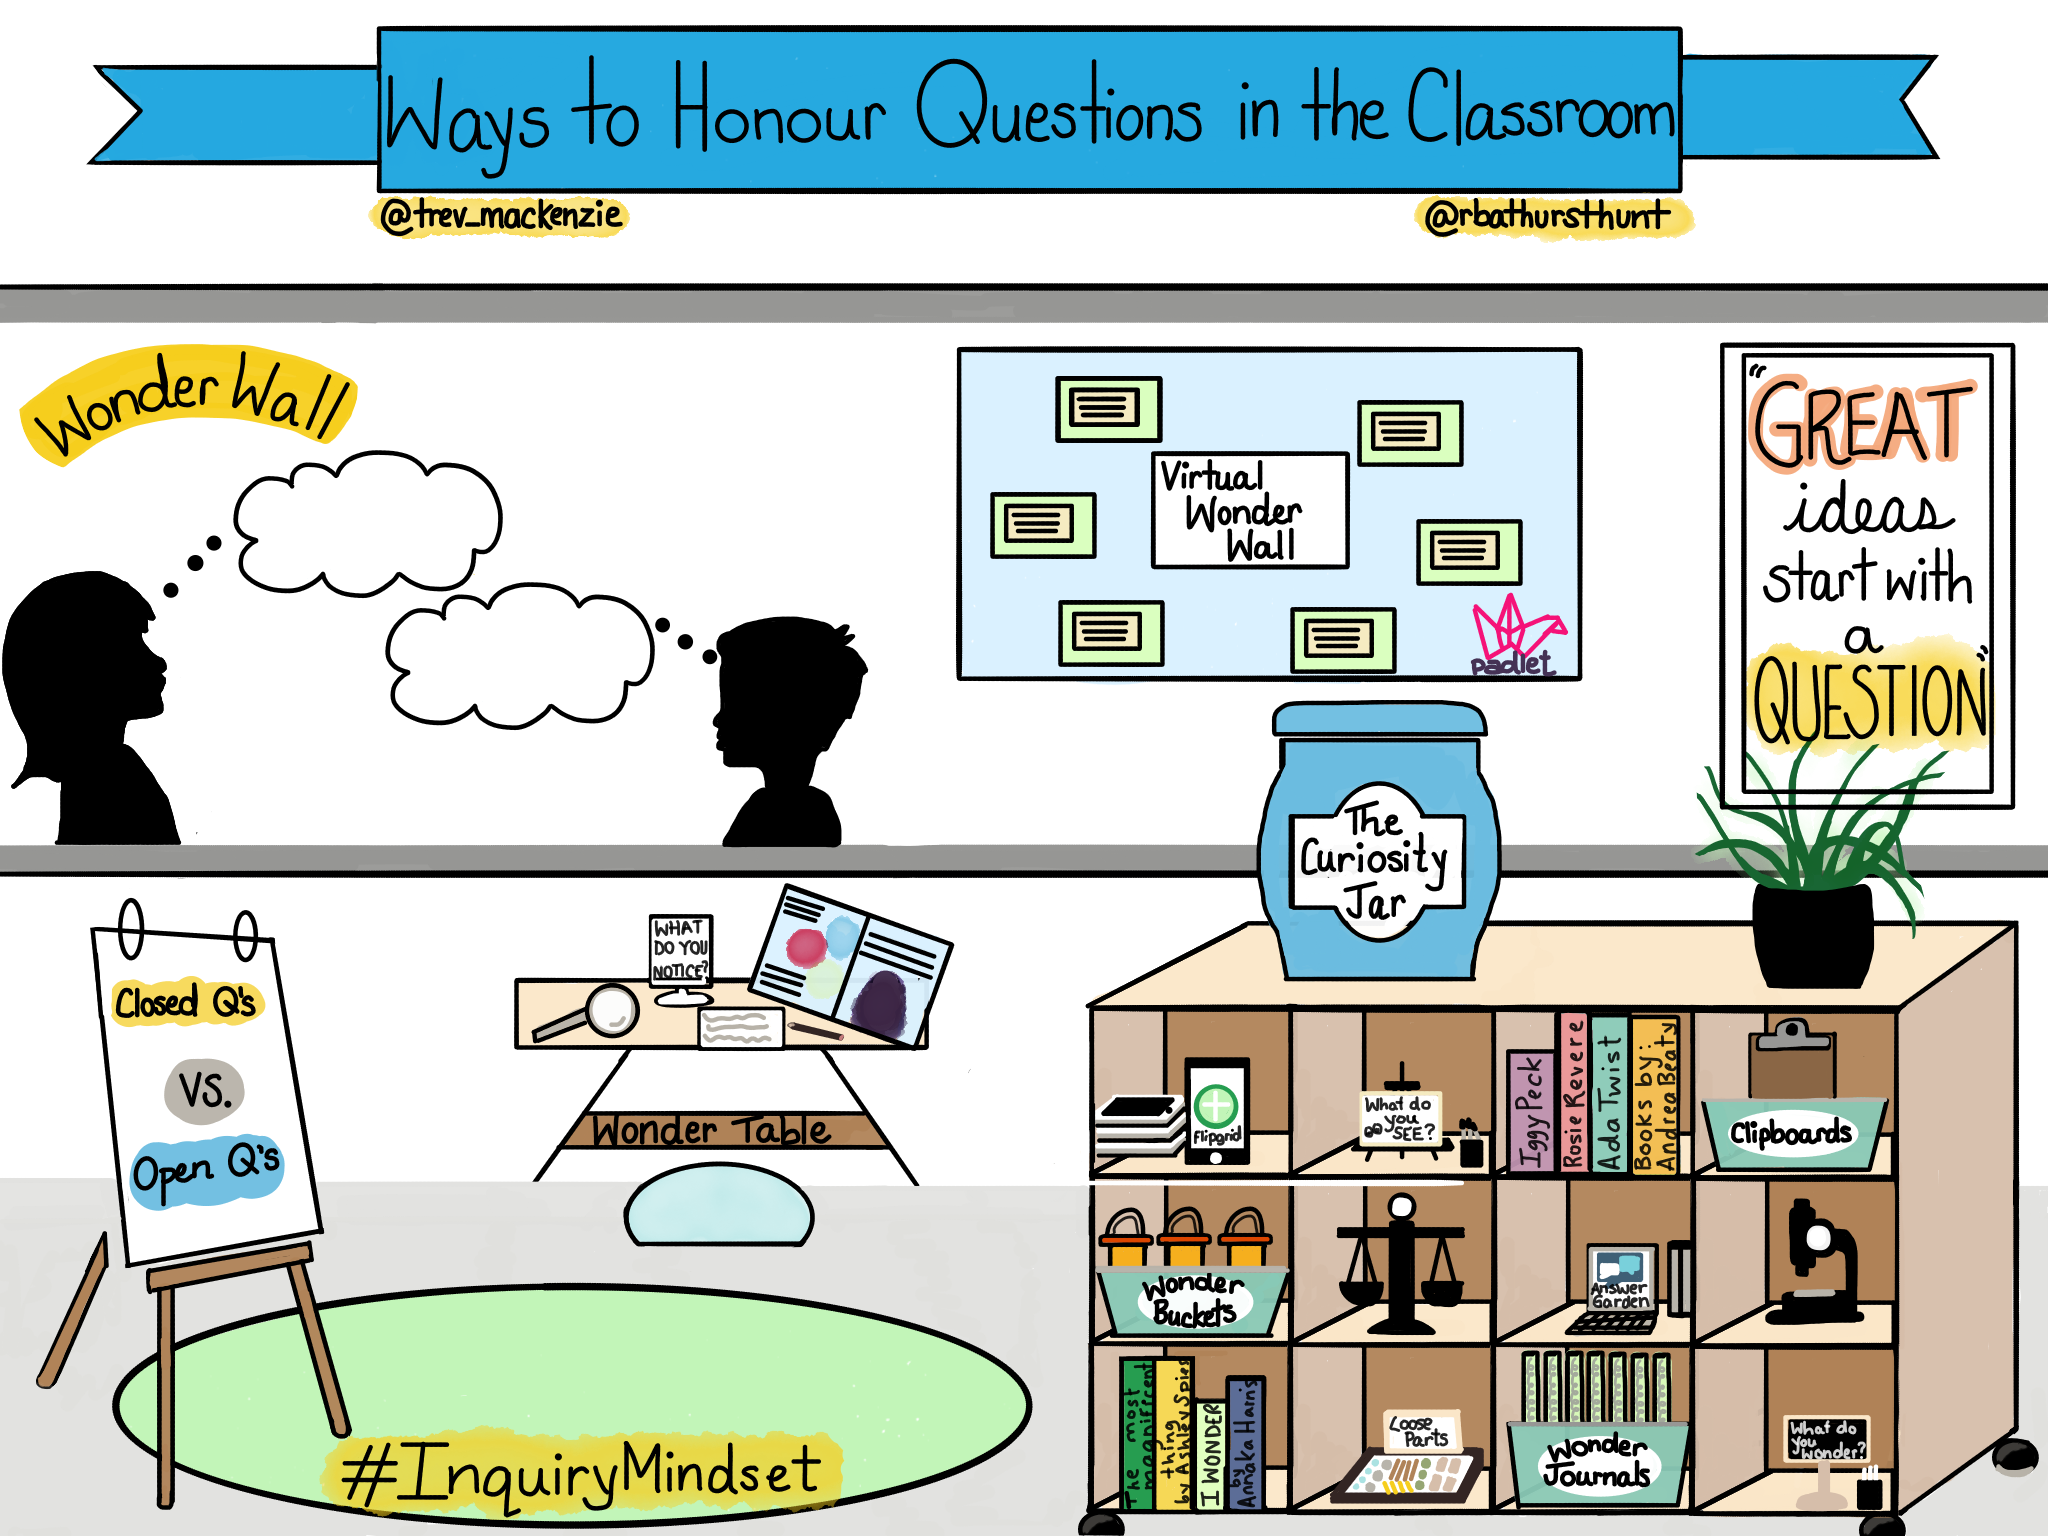 Ways to Honor Questions in the Classroom